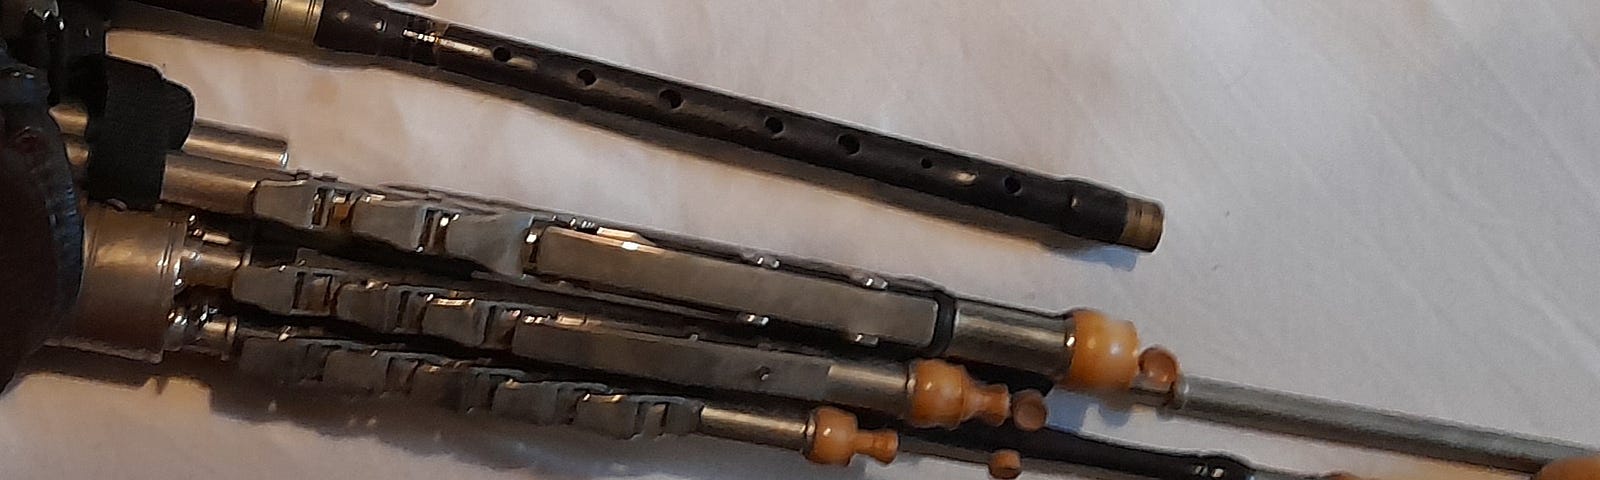 A set of Uillean pipes, which is an Irish instrument consisting of four chanters and three drones